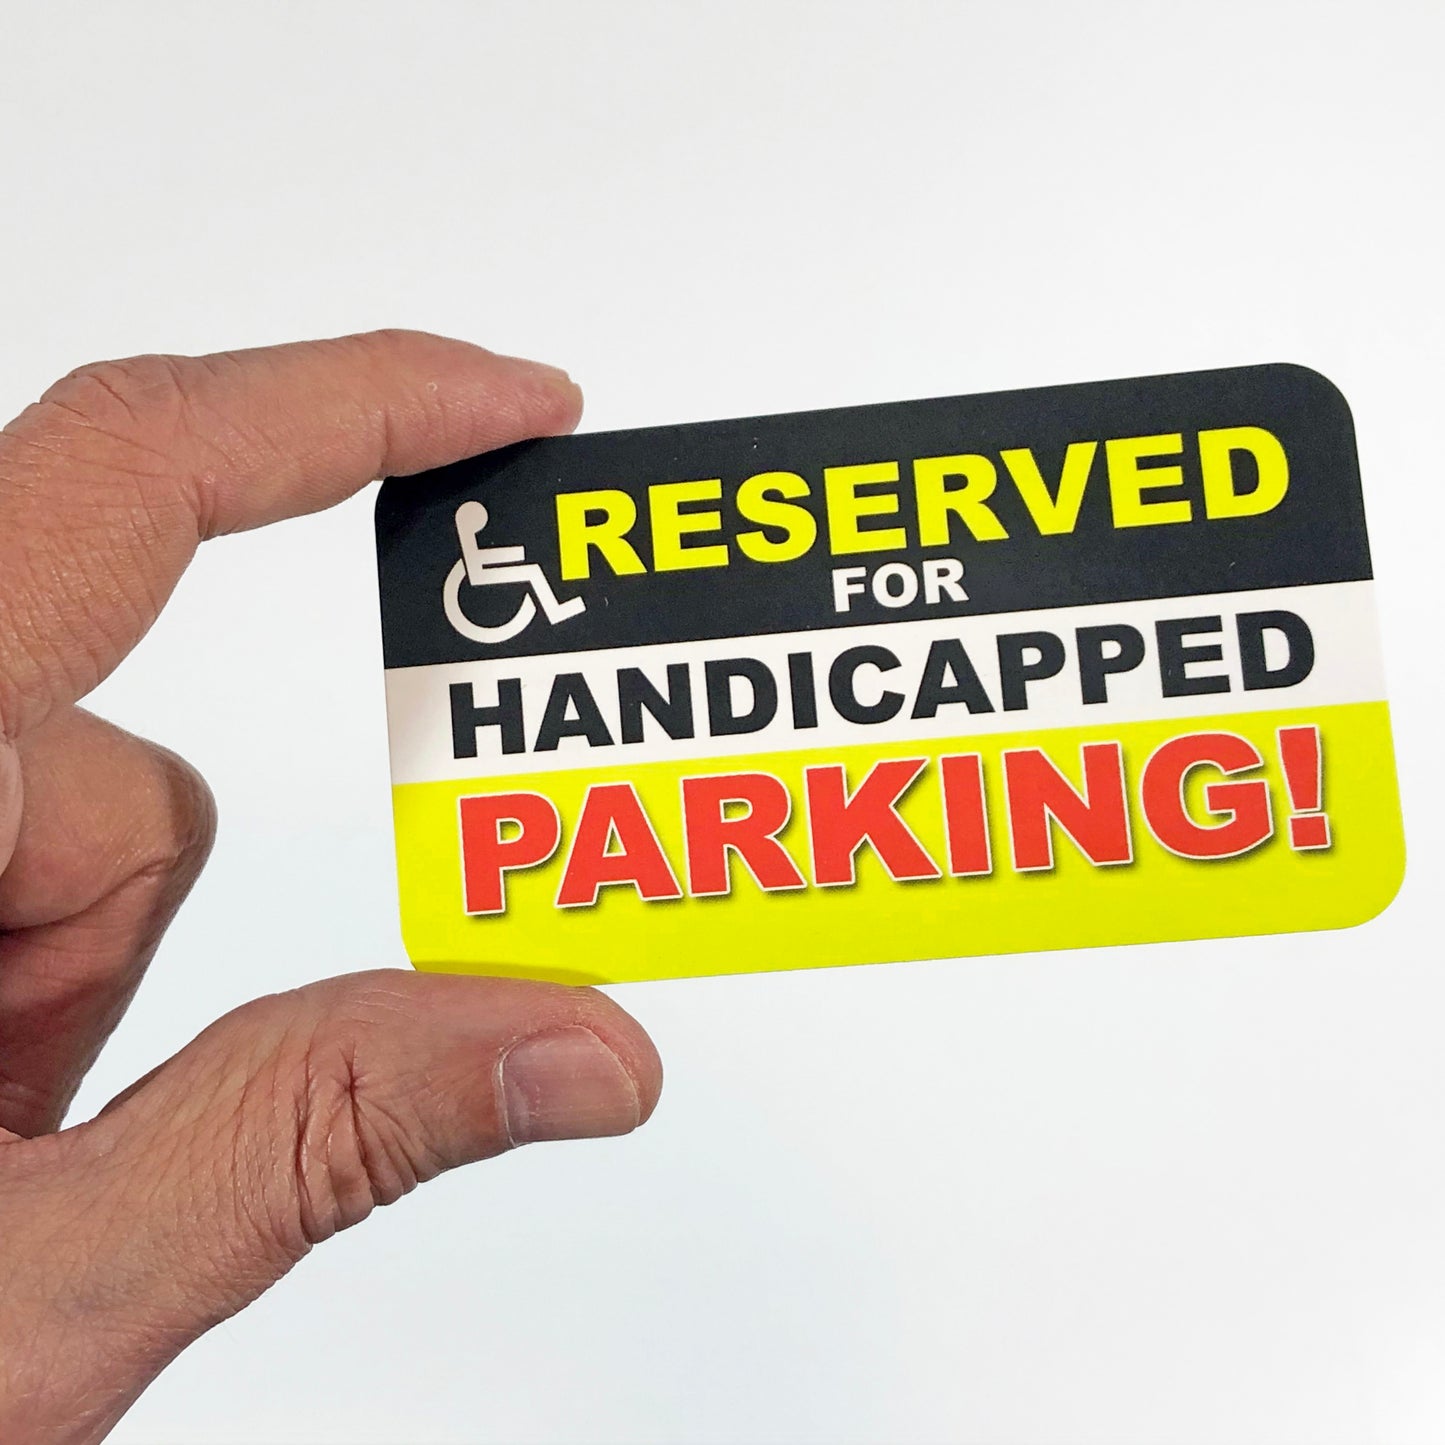 Handicapped Parking Douchebag Parking Prank Cards that you leave under Windshield Wipers to get your point across!